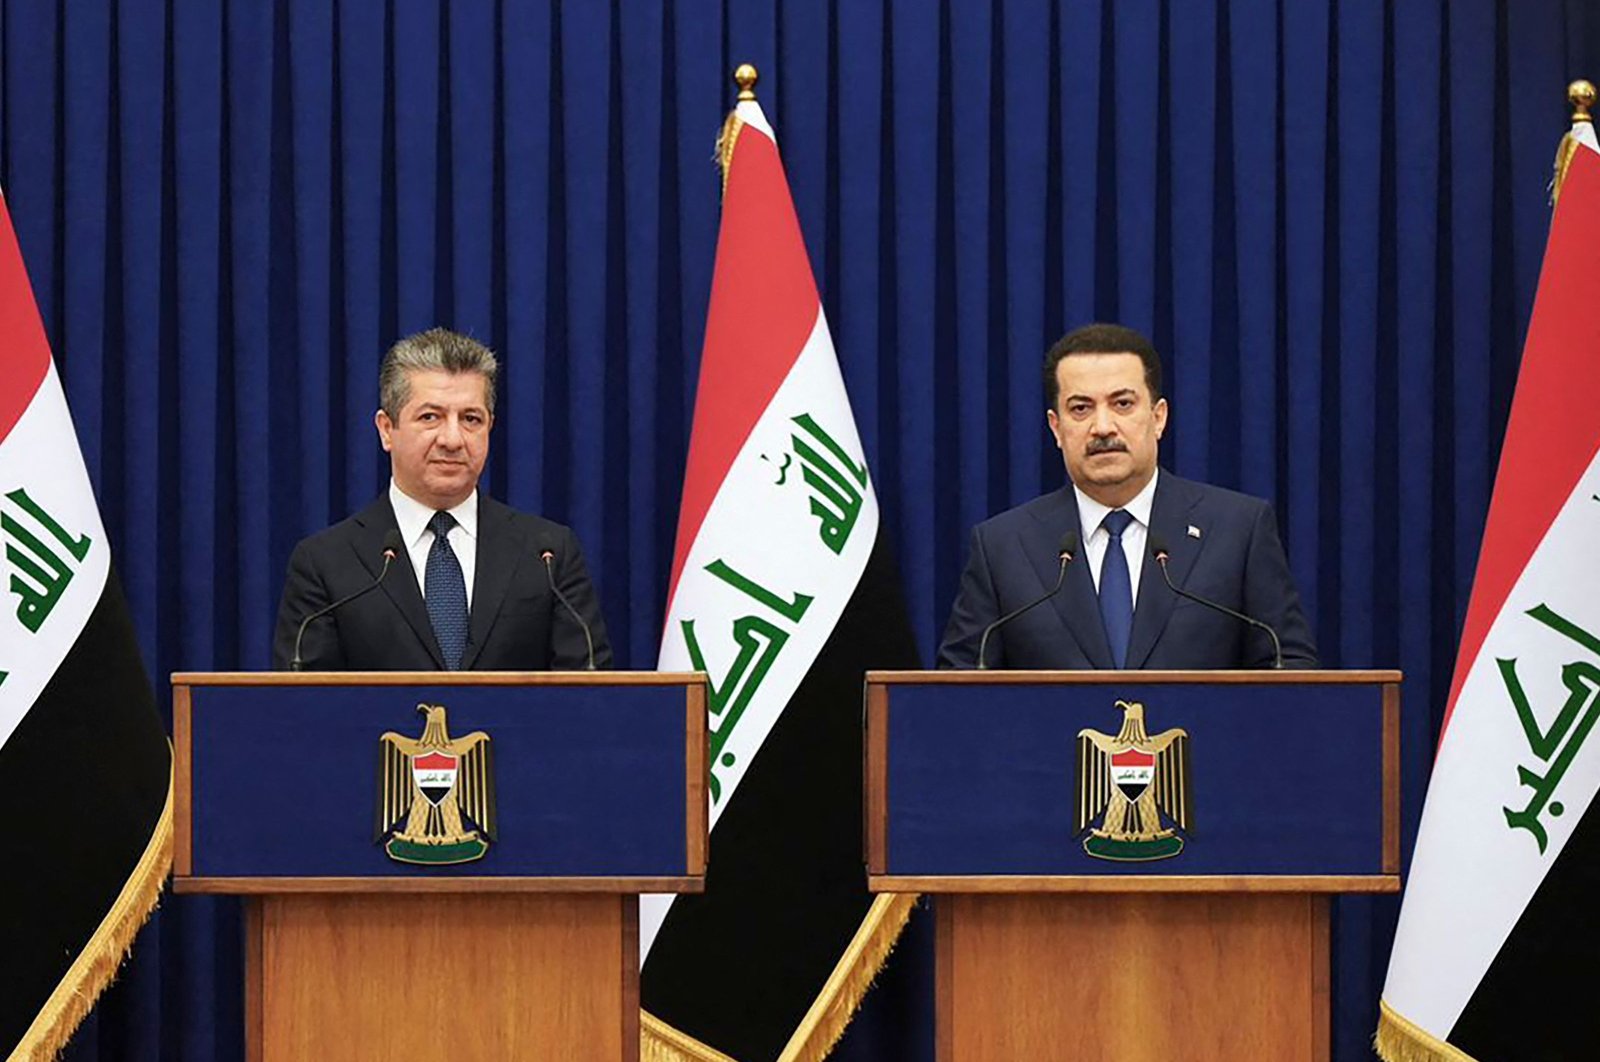 Iraqi Prime Minister Mohammed Shia Al Sudani (R) and Kurdistan Regional Government (KRG) Prime Minister Masrour Barzani hold a joint news conference in Baghdad, Iraq, April 4, 2023. (AFP Photo)